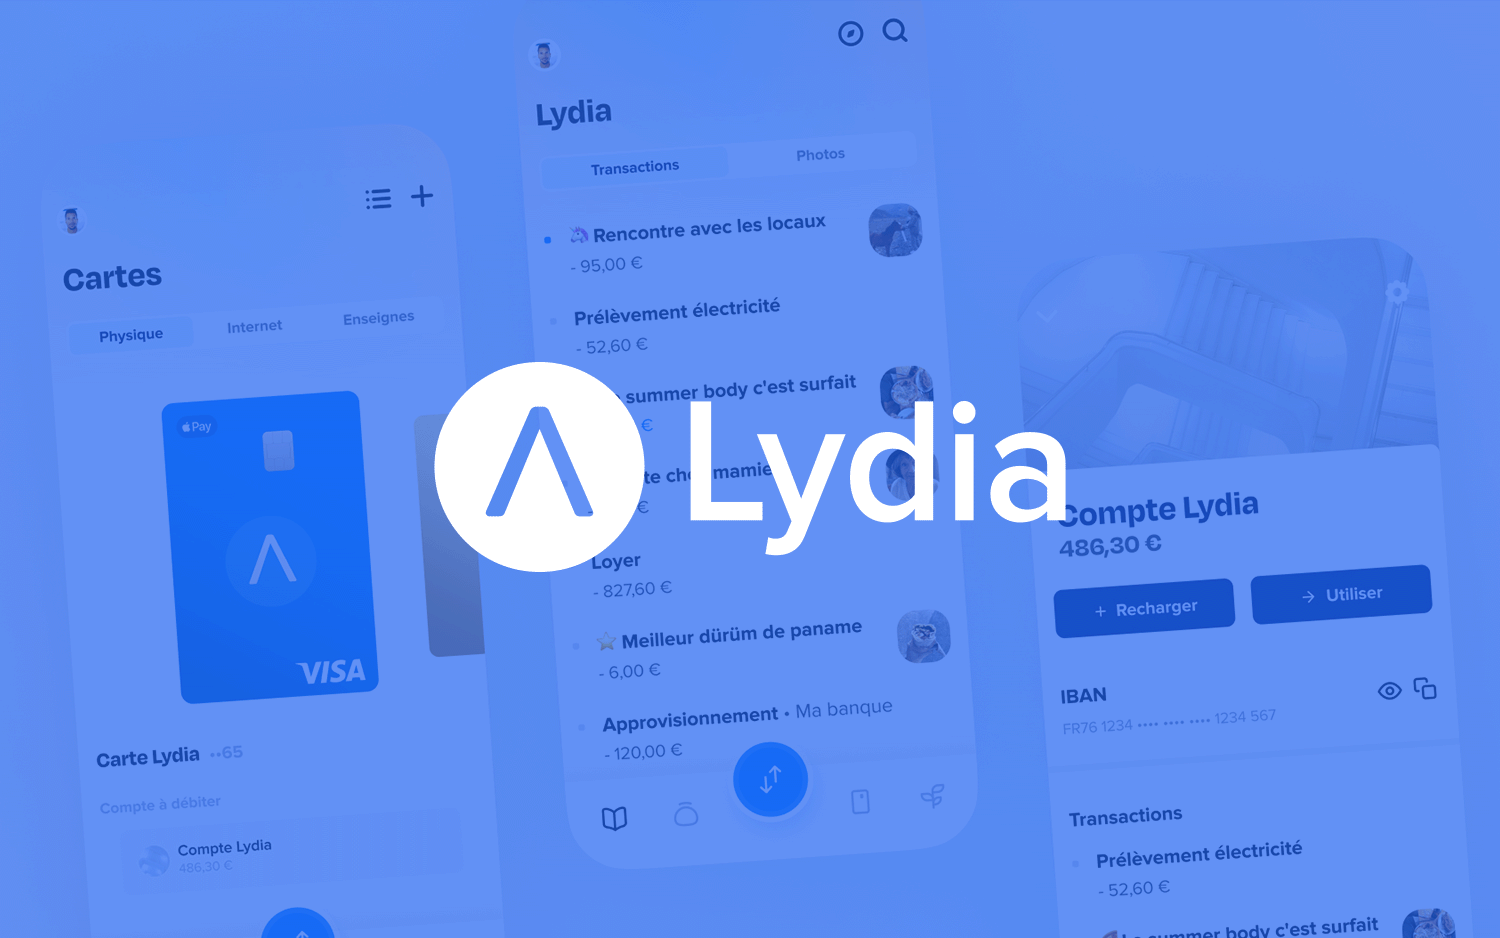 How the Lydia Design Team Gains Autonomy, Moves Faster, and Improves Conversion with Data-Driven Design